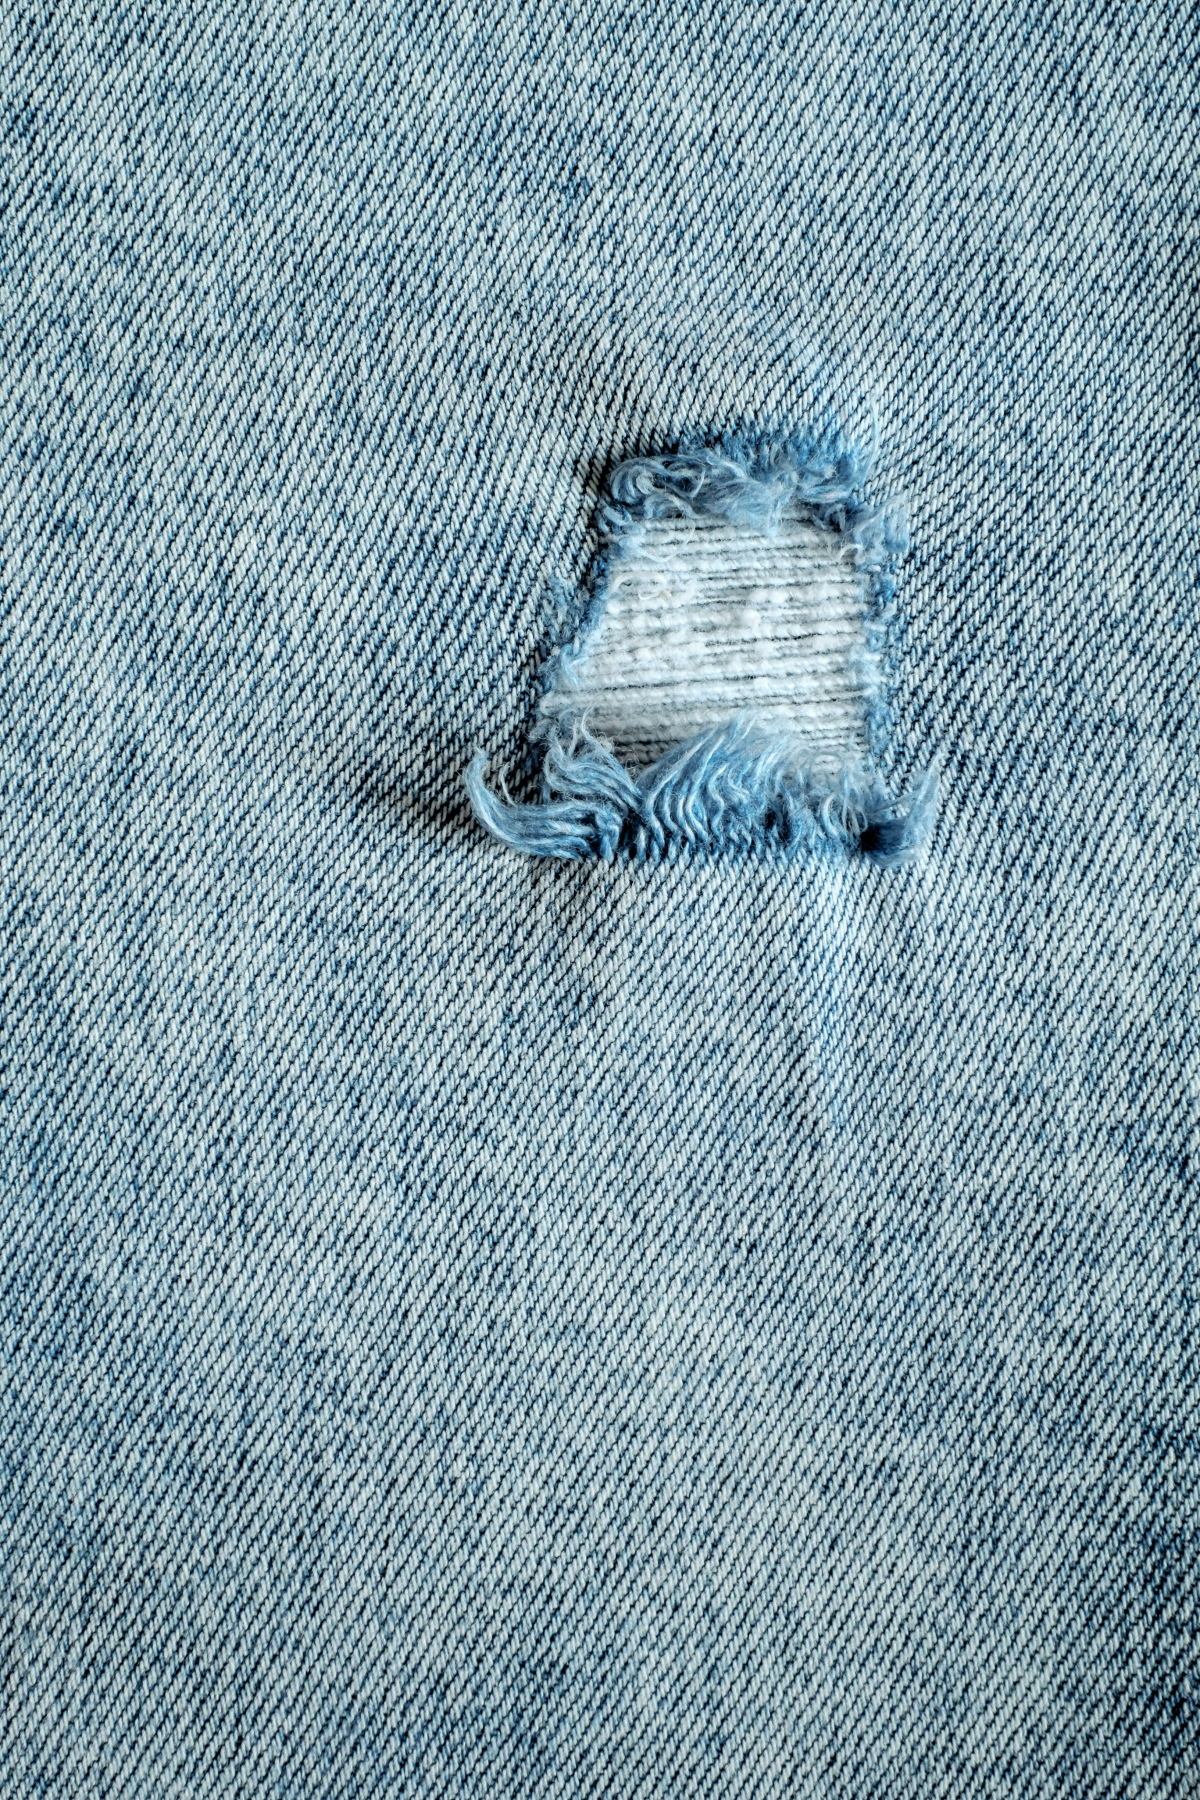 how to sew a hole small ripped hole in jeans